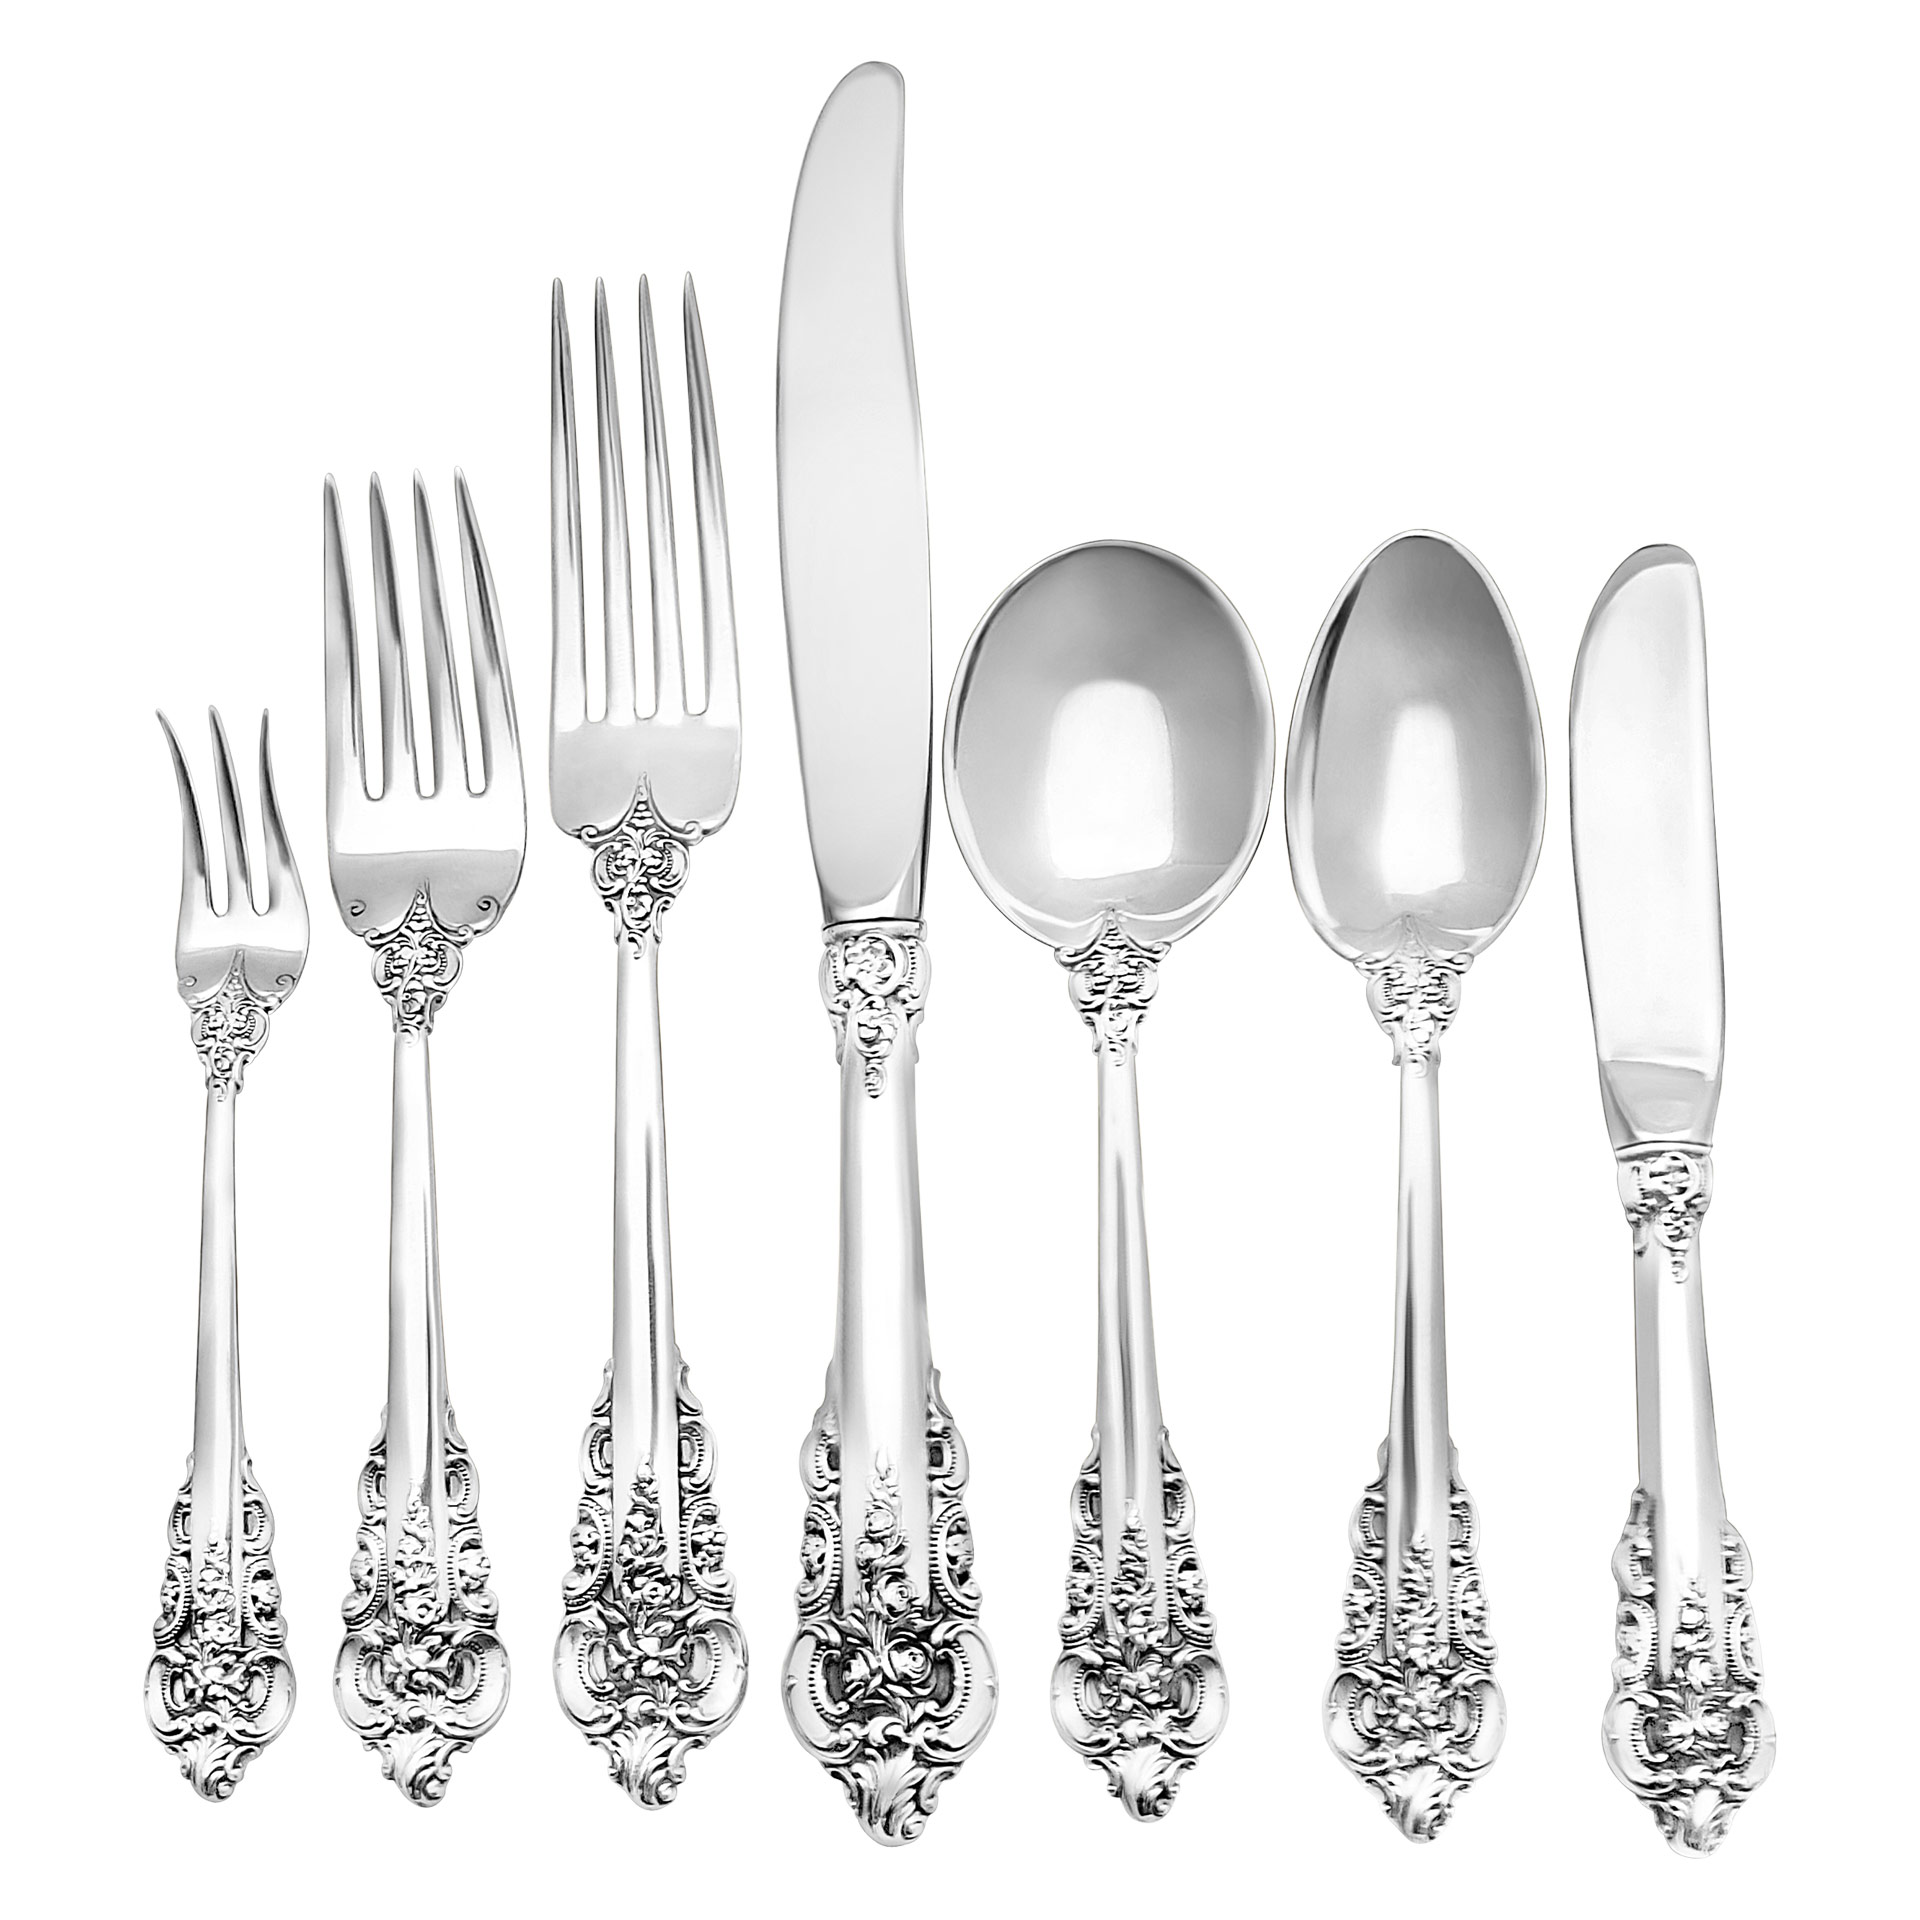 "GRANDE BAROQUE" Sterling Silver Flatware Set. Ptd 1941 by Wallace. 7 place setting for 12 with 8 serving pieces. Over 3500 grams sterling silver. image 1